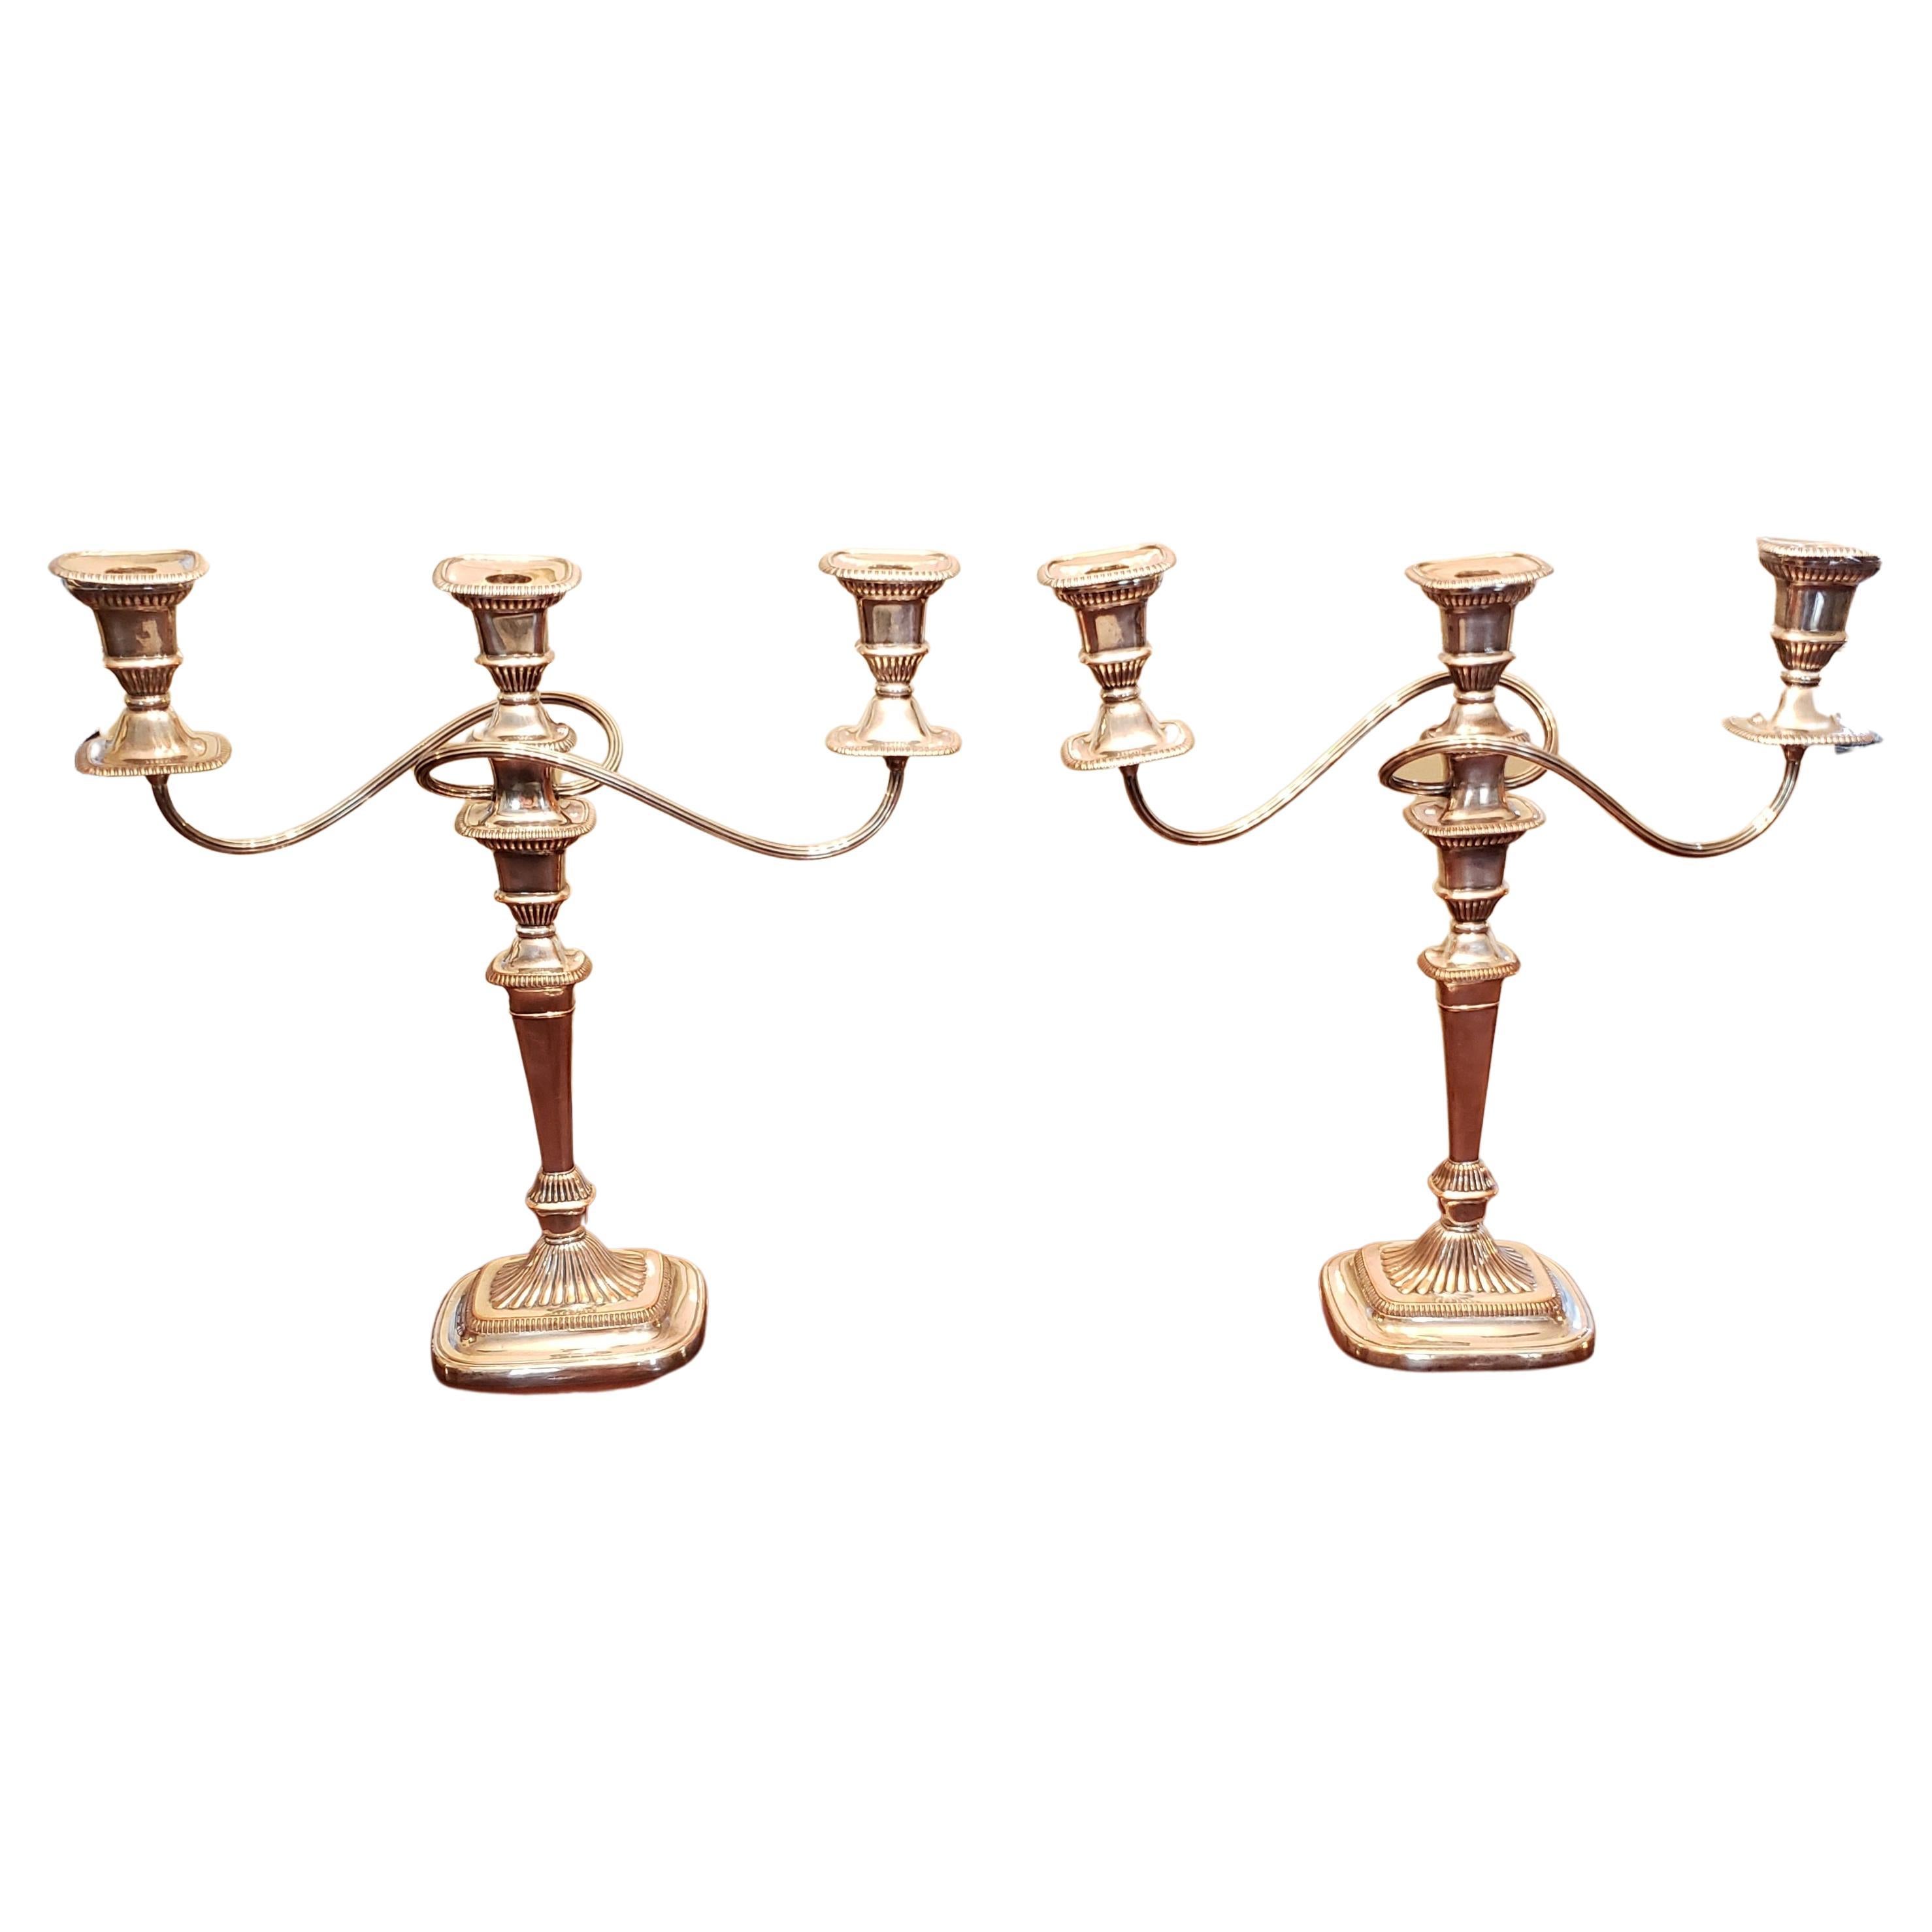 Pair of Sheffield Silverplated Convertible Three Light Candelabras, Circa 1840s For Sale